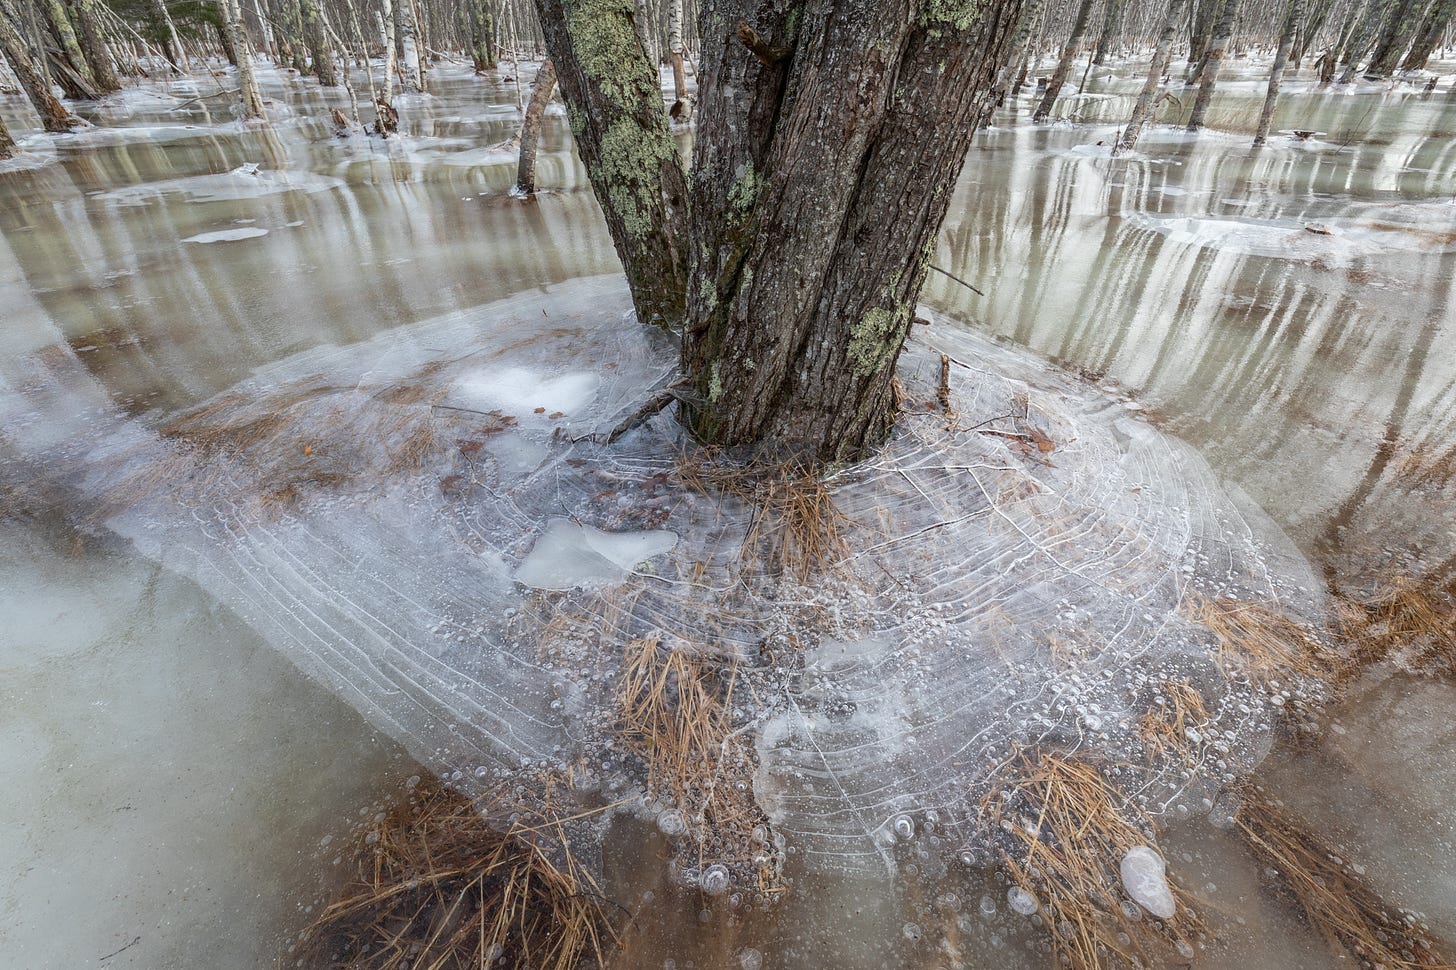 Ice settling as the water beneath begins to drain in January of 2019. Acadia National Park, Mount Desert Island, Maine